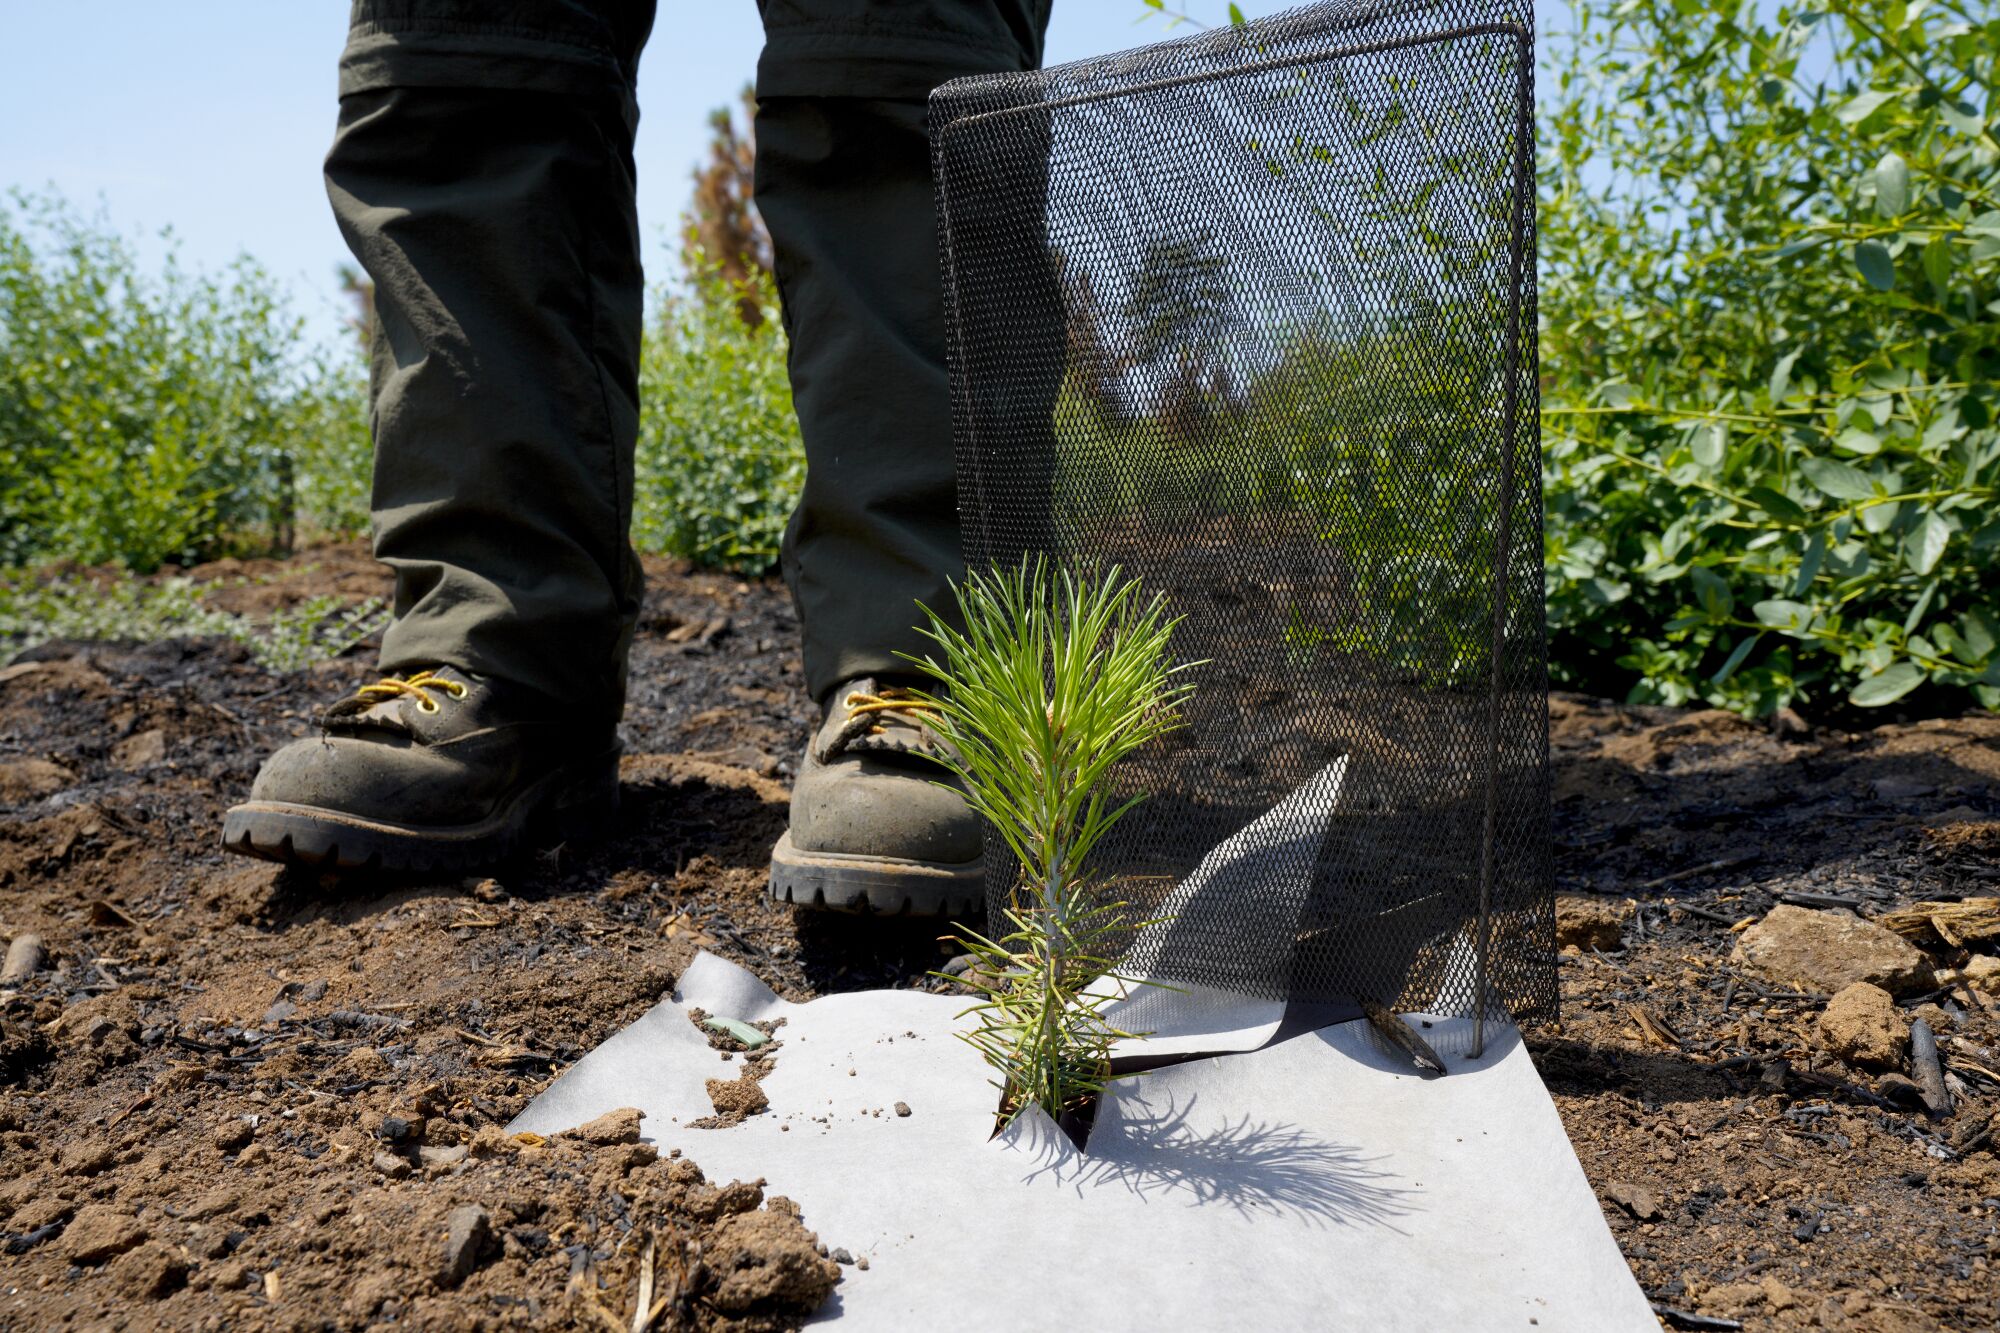 Lisa Gonzales-Kramer, an environmental scientist with the Cuyamaca Rancho State Park, stands next to a pine seedling.